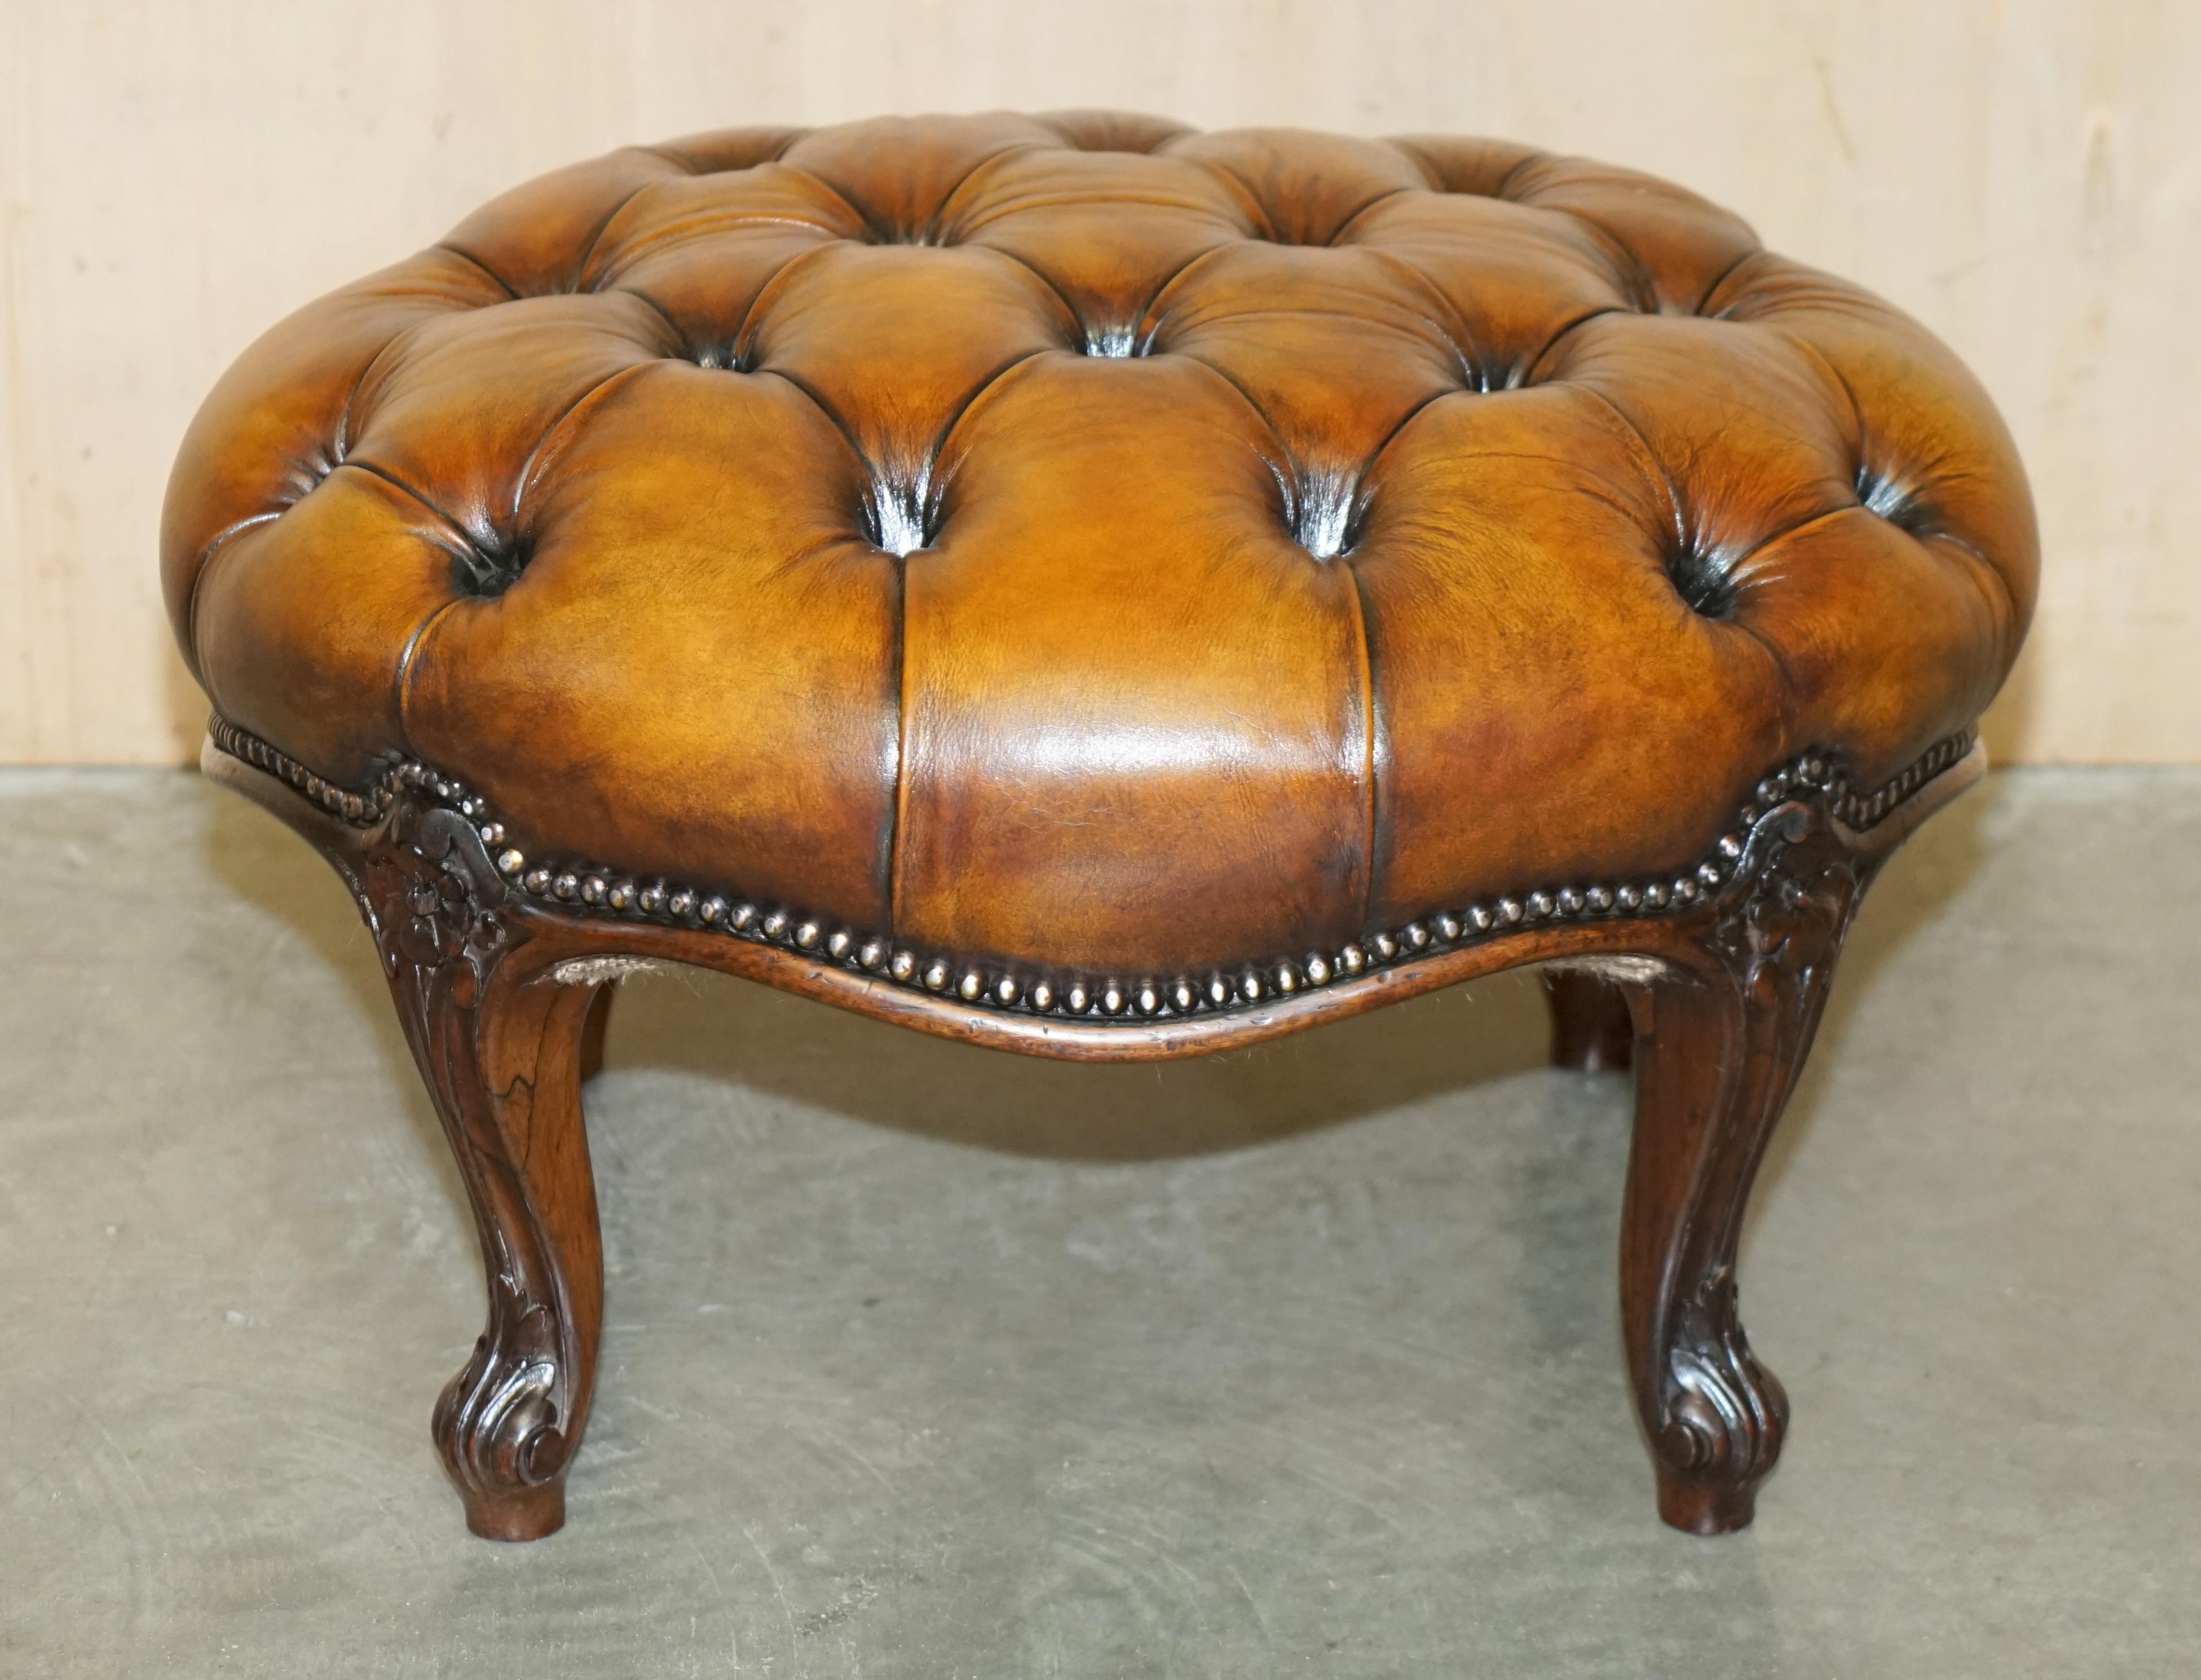 Royal House Antiques

Royal House Antiques is delighted to offer for sale this absolutely stunning fully restored hand dyed cigar brown leather Victorian Chesterfield footstool 

Please note the delivery fee listed is just a guide, it covers within